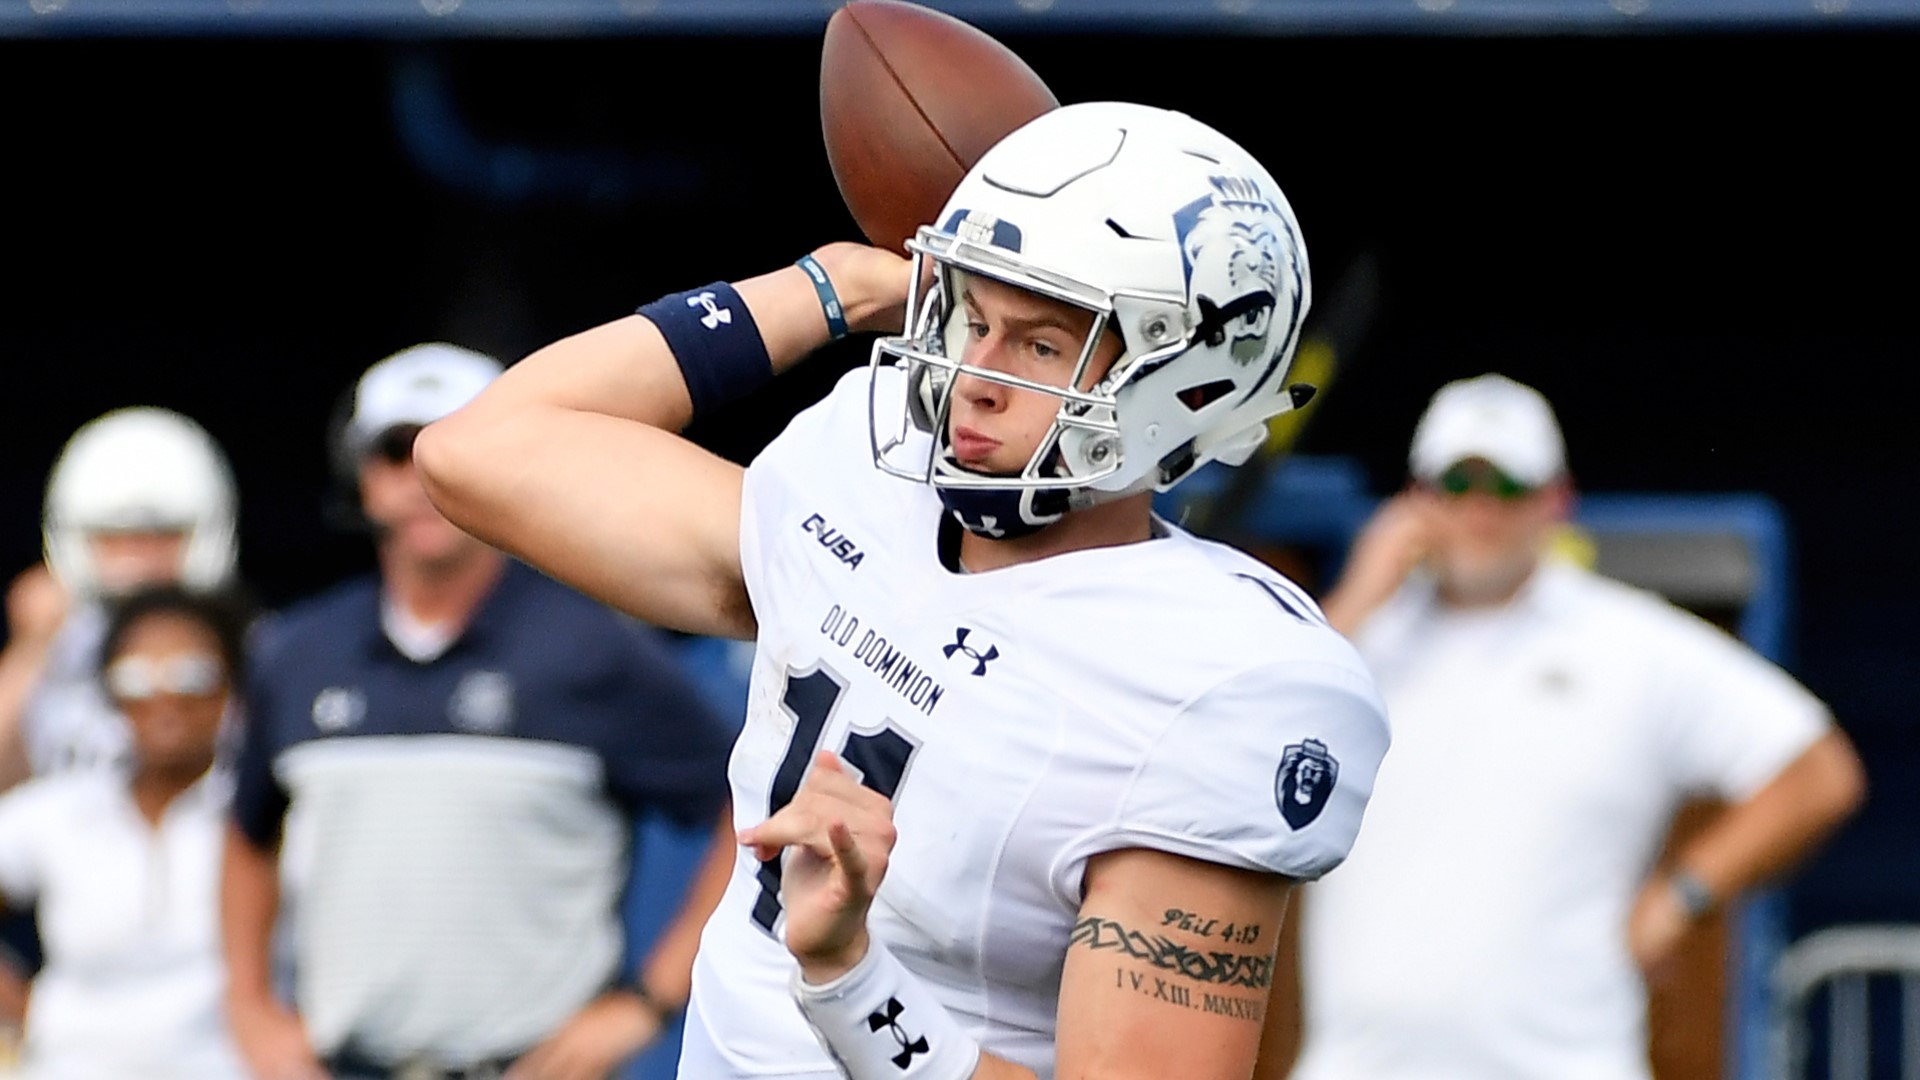 The ODU head coach comments on his new starting quarterback, the freshman Hayden Wolff.